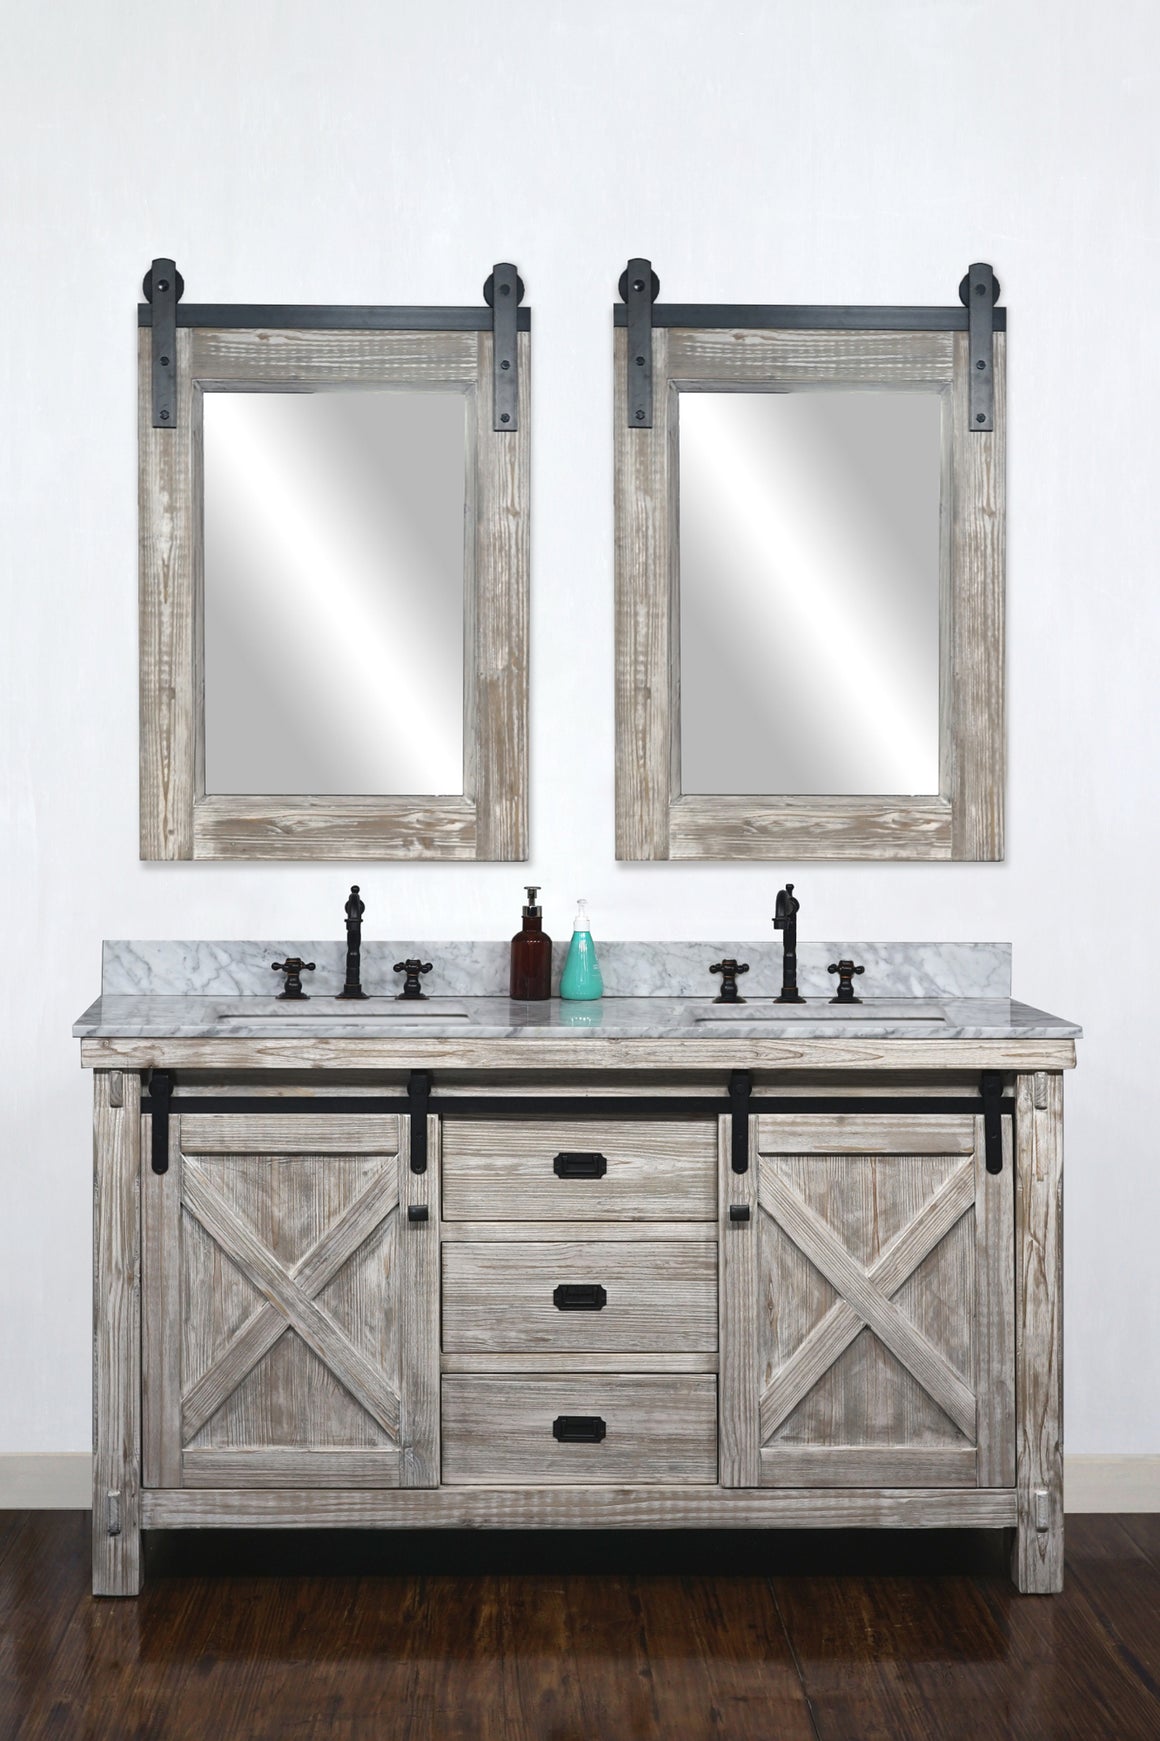 60"RUSTIC SOLID FIR BARN DOOR STYLE DOUBLE SINKS VANITY IN WHITE WASH WITH CARRARA WHITE MARBLE TOP WITH RECTANGULAR SINK-NO FAUCET